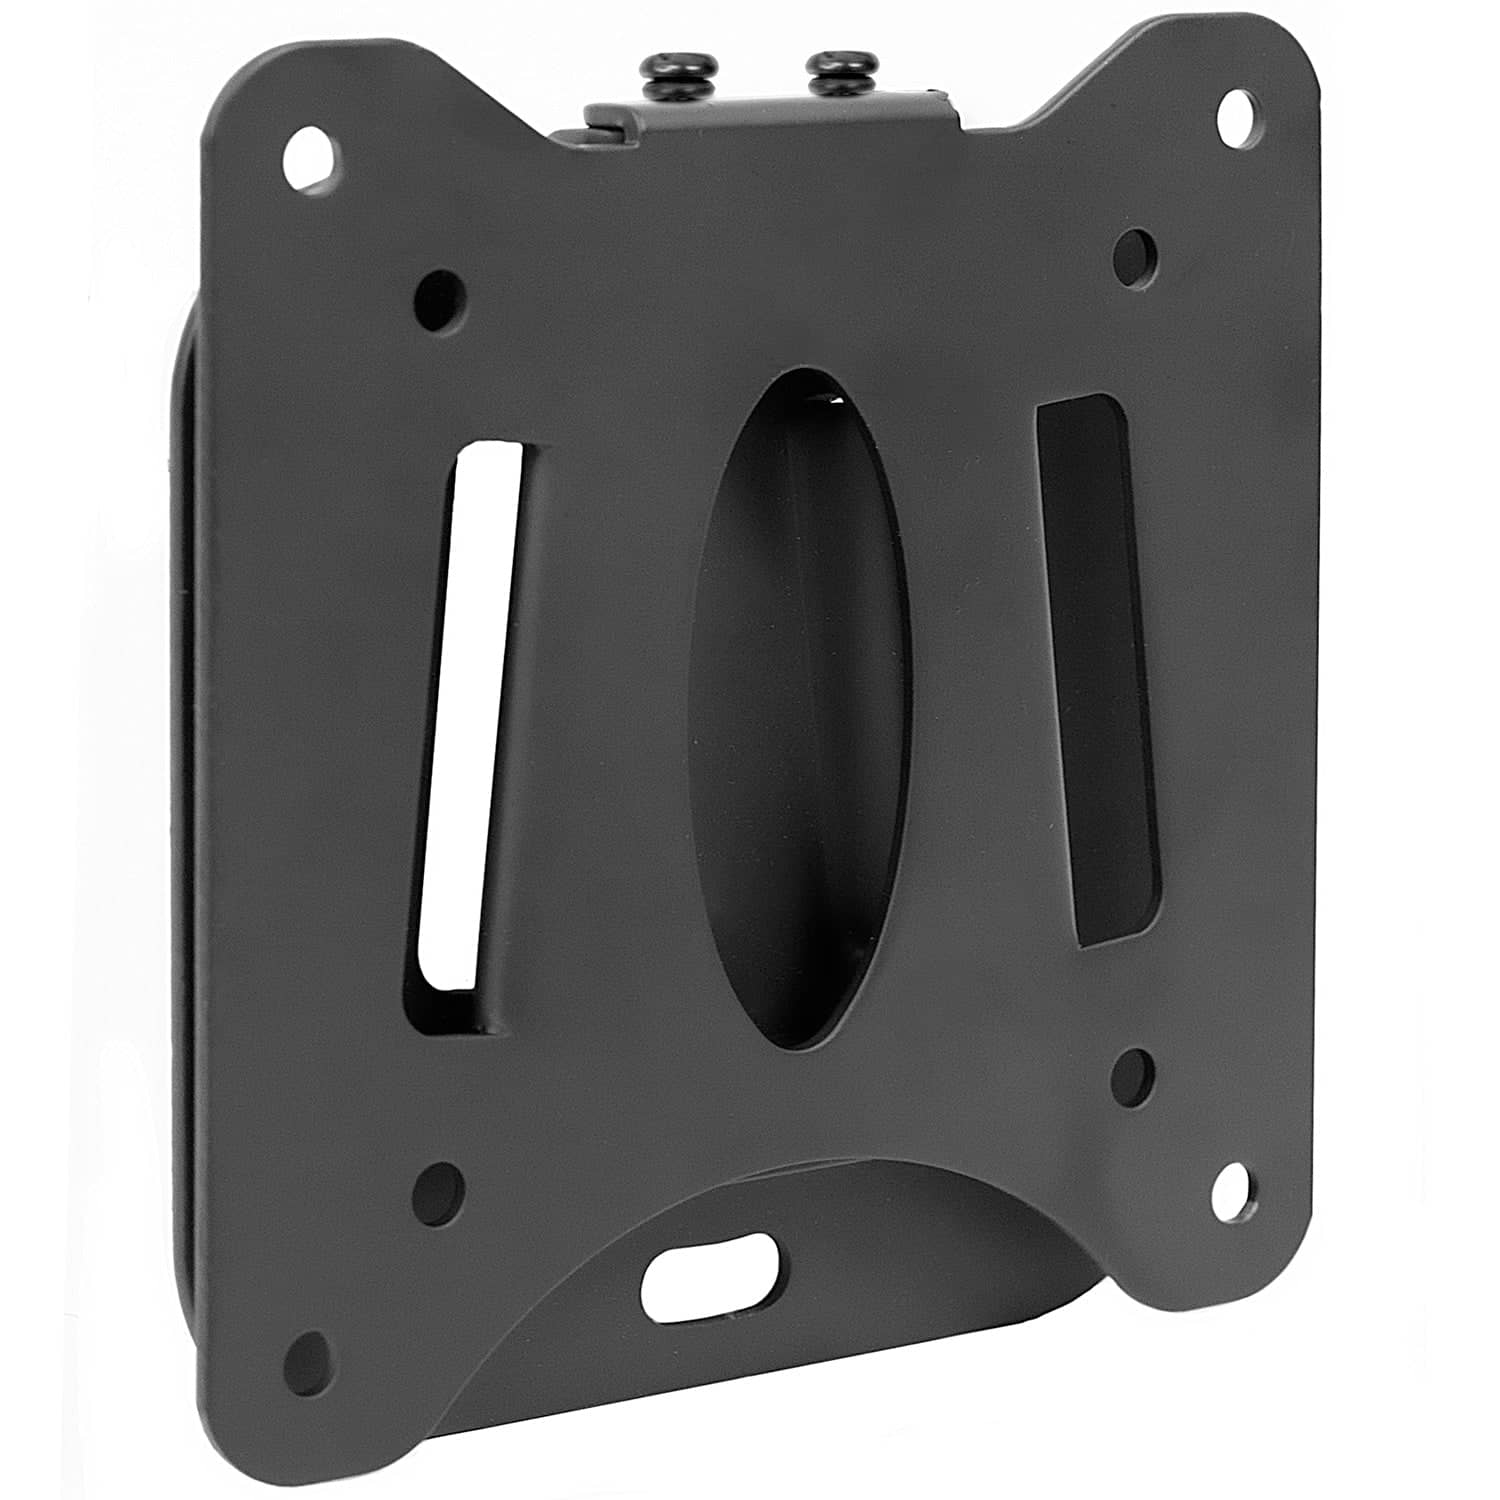 Mount-it! Low Profile Fixed TV Mount (MI-203), Low Profile of 0.55" from the Wall, Fits 13" to 32" TVs